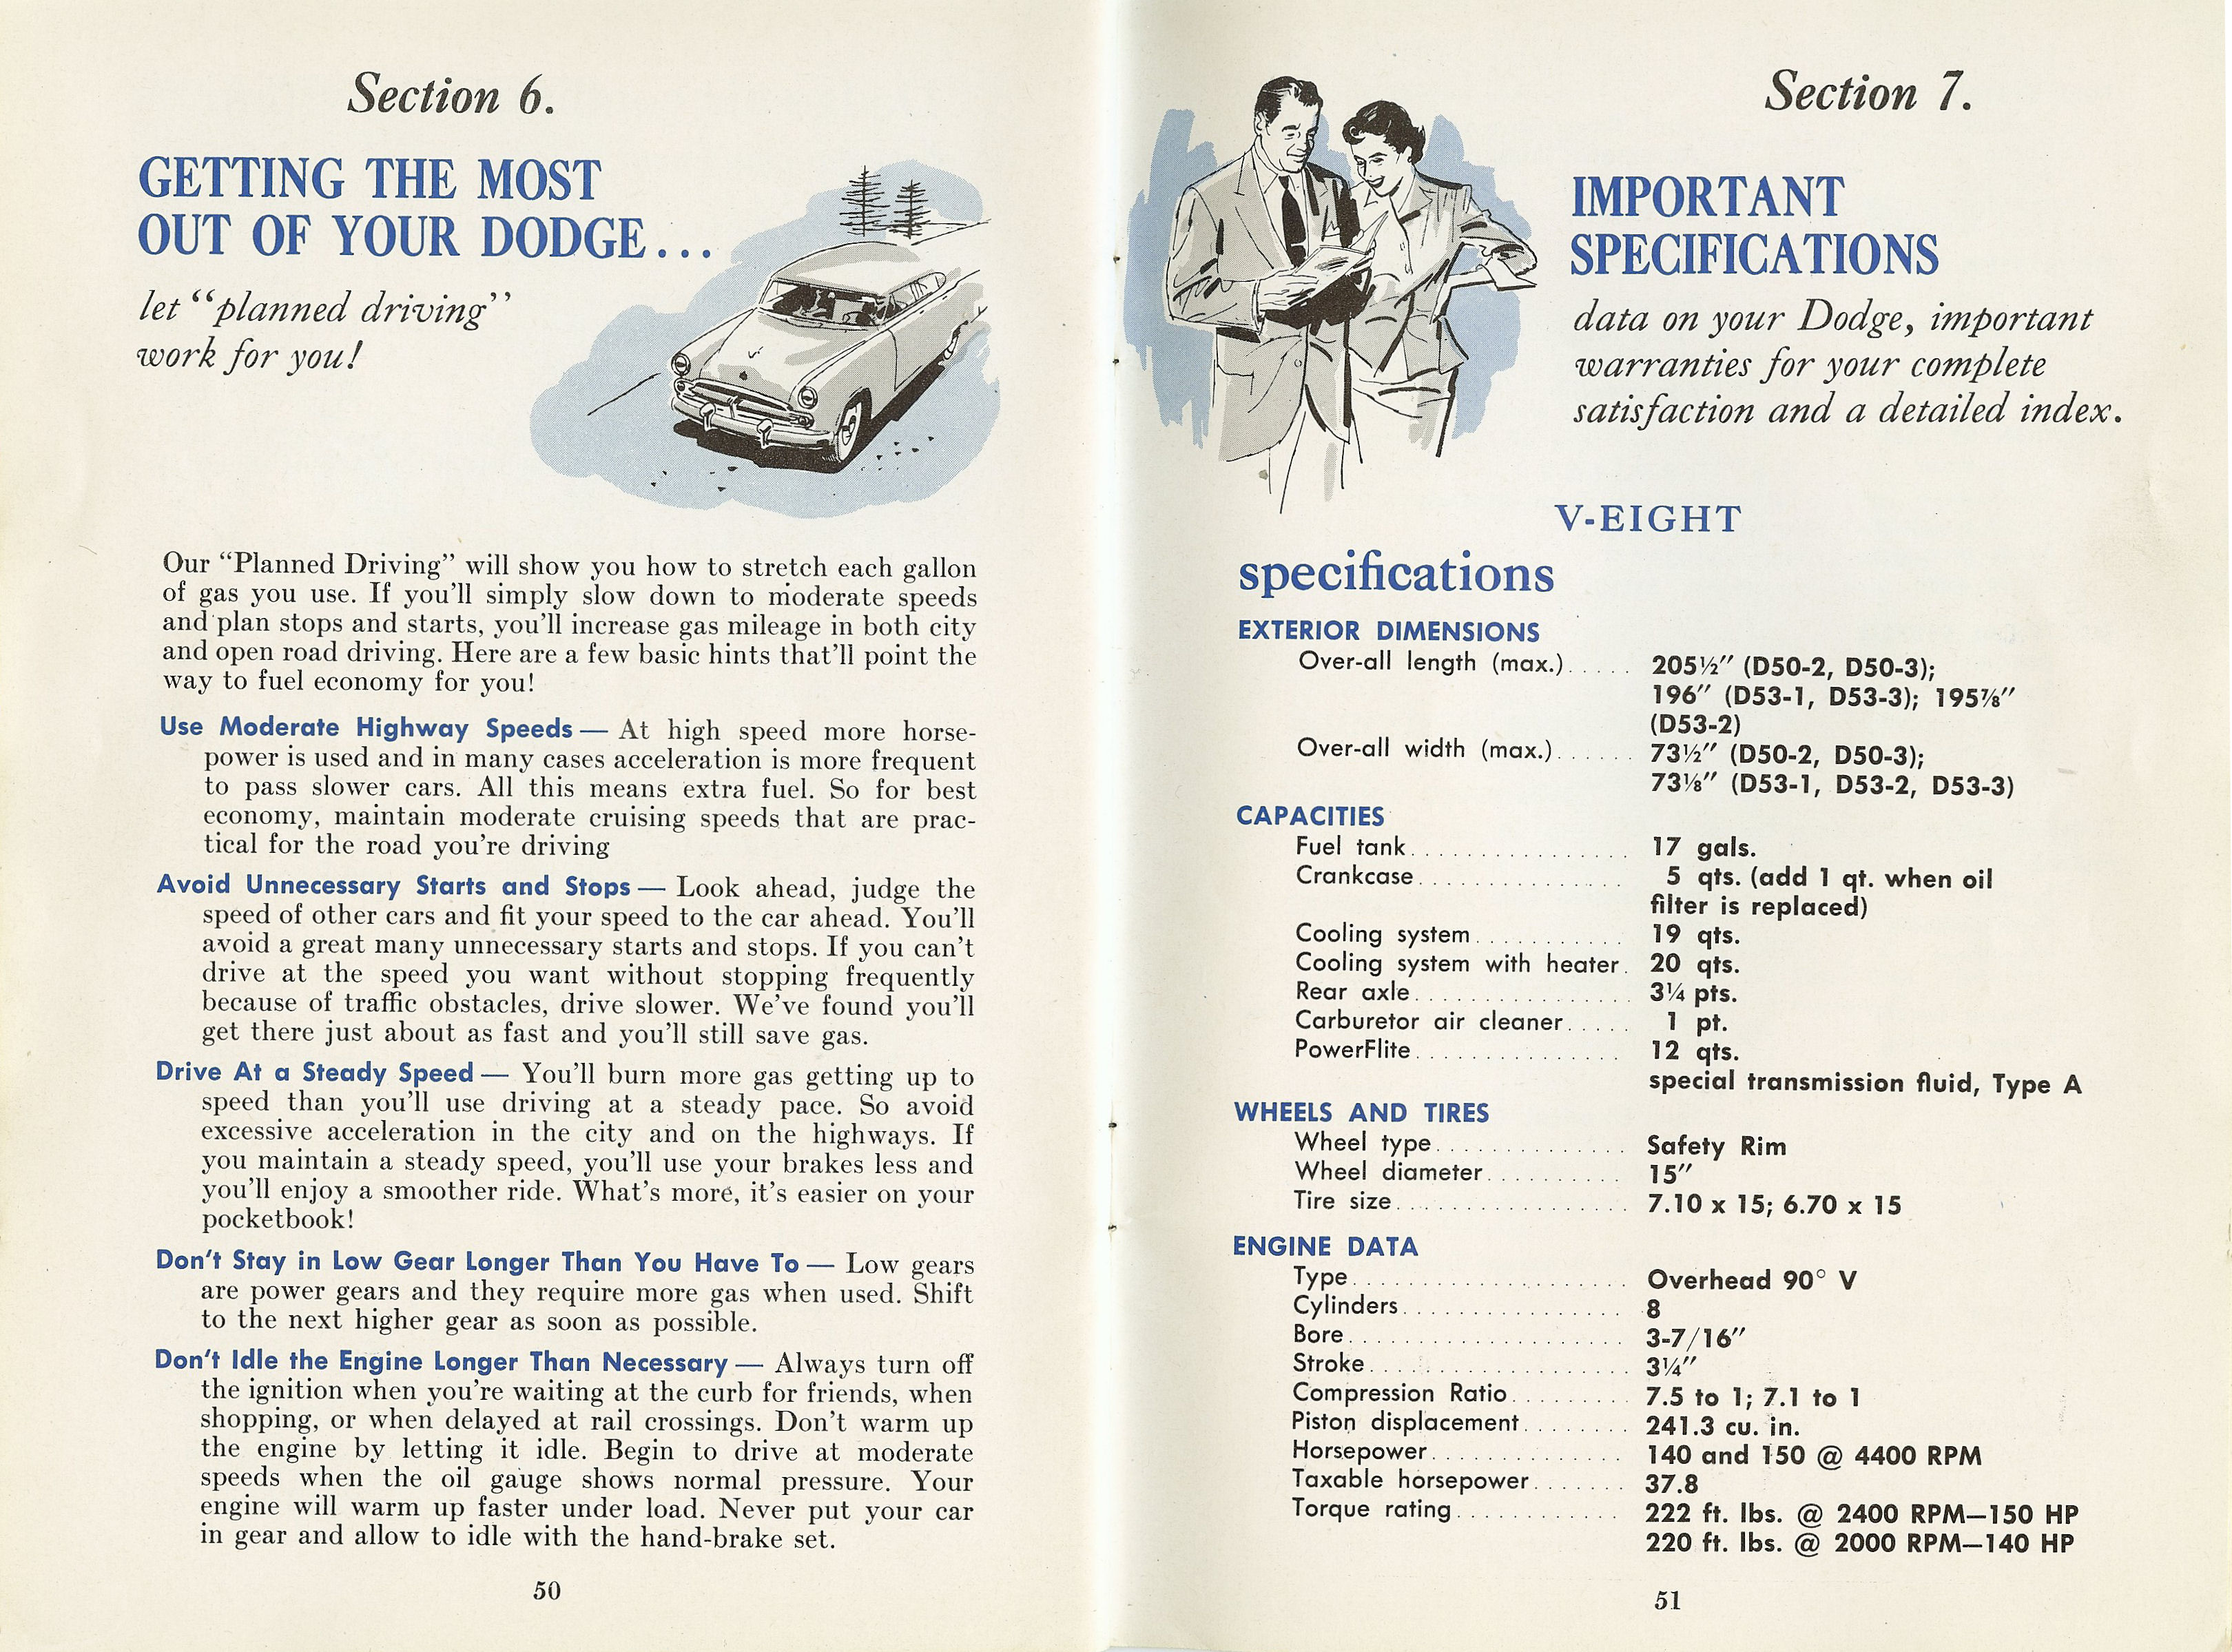 1954 Dodge Owners Manual-50-51